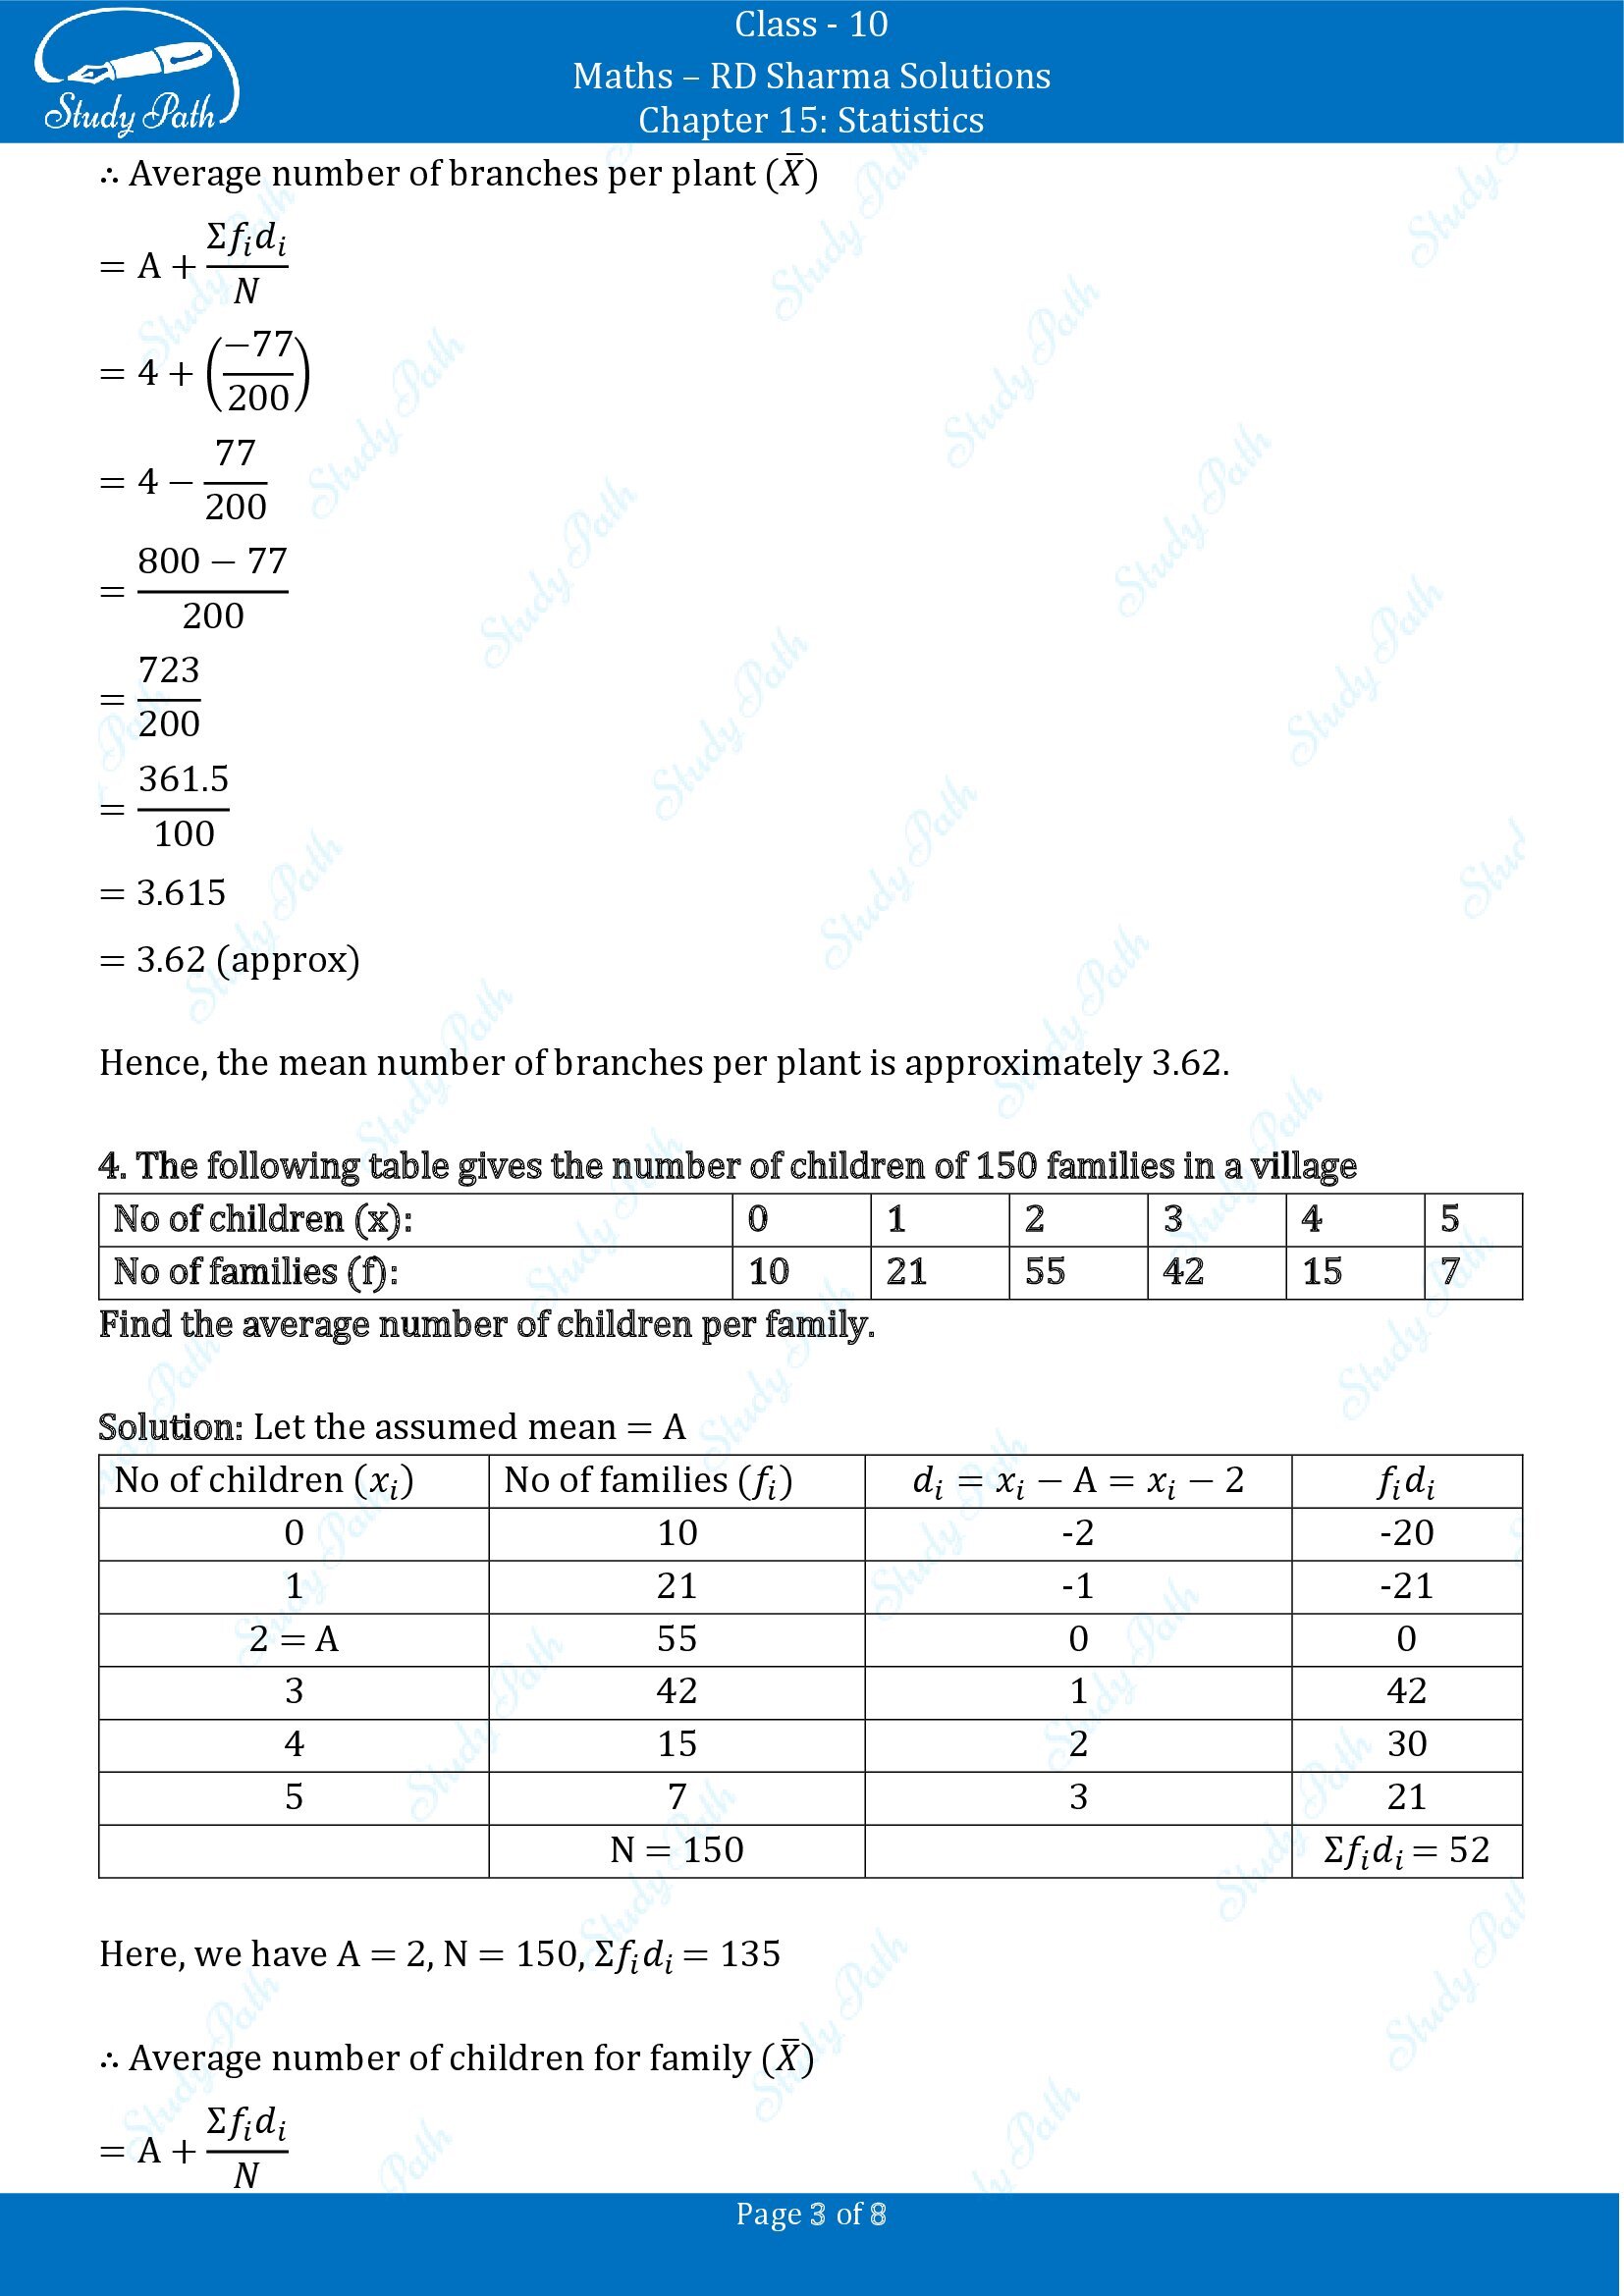 RD Sharma Solutions Class 10 Chapter 15 Statistics Exercise 15.2 00003